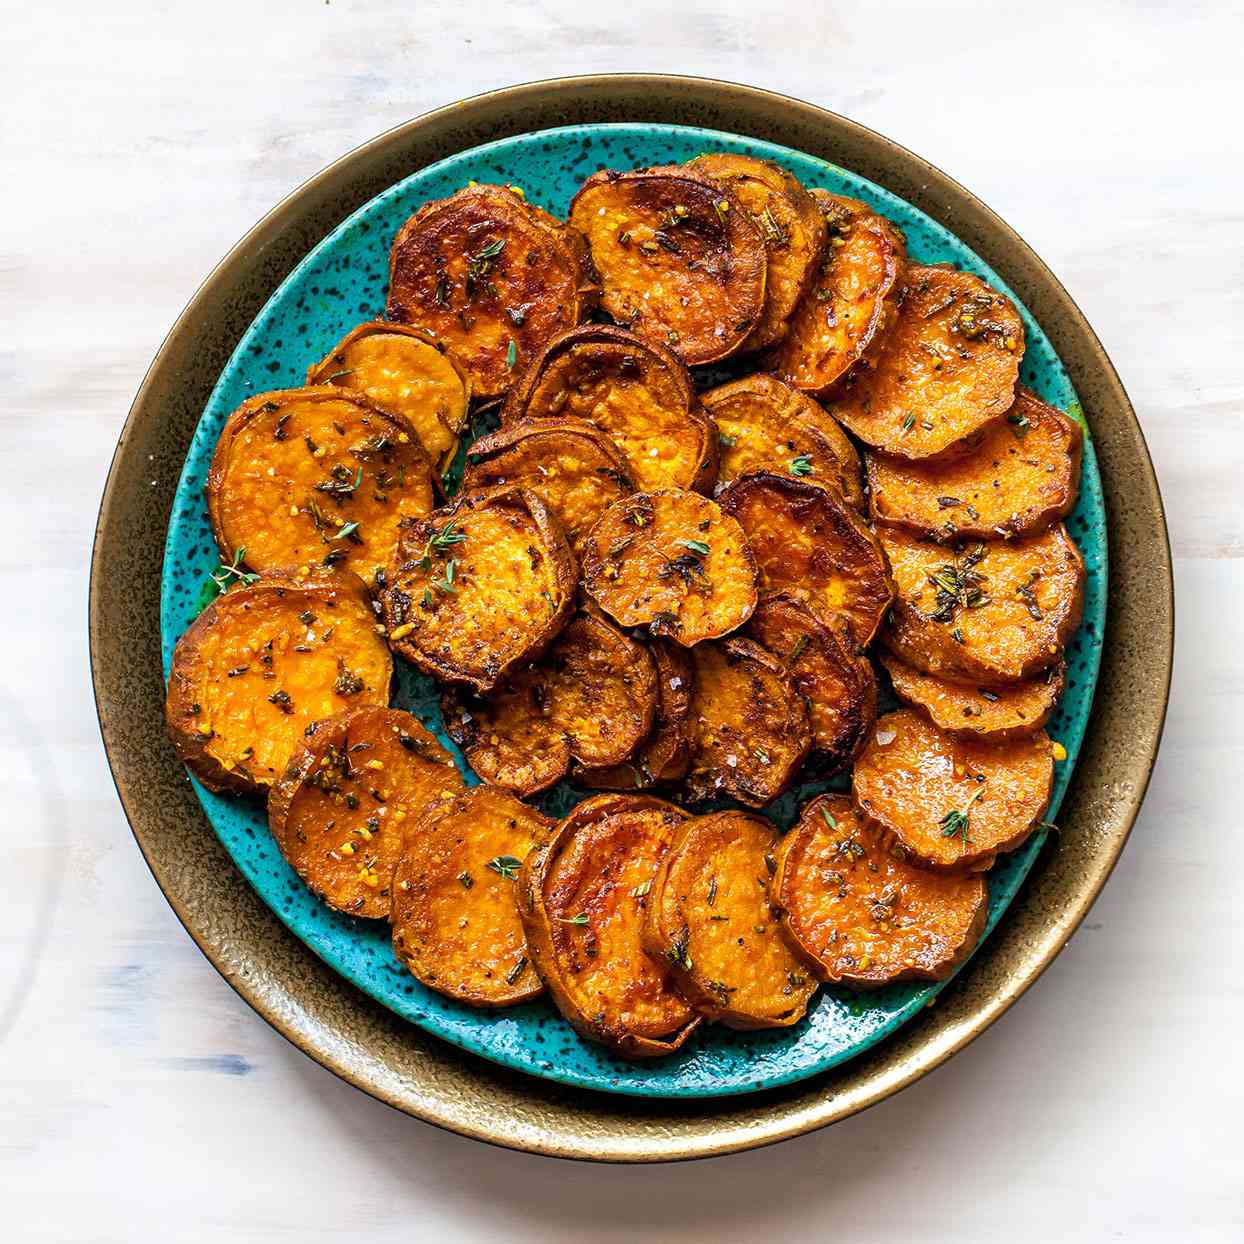 What Herbs Go Well With Sweet Potatoes